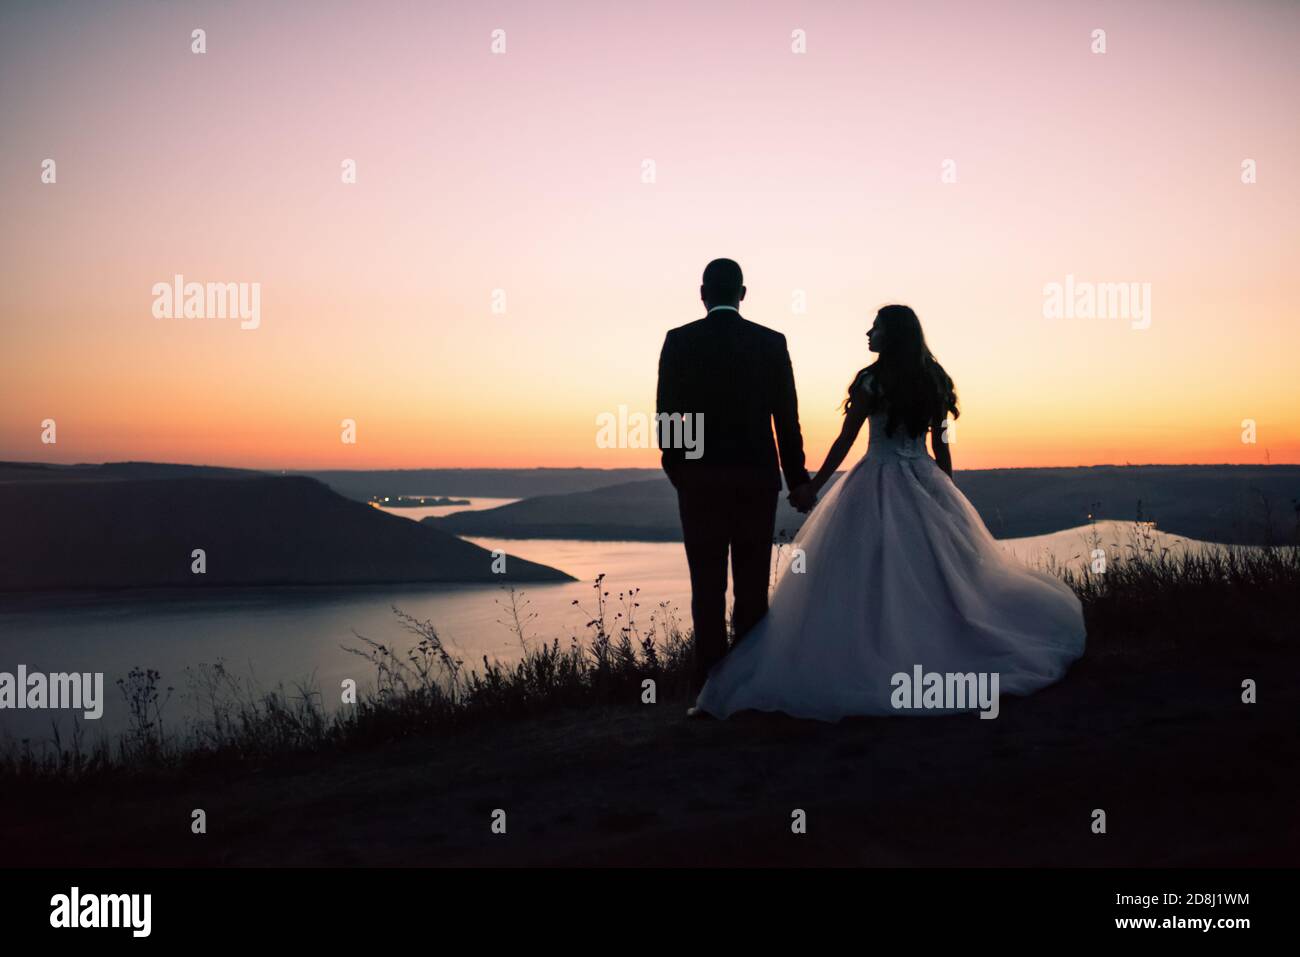 Silhouettes of bride and groom at night against lake and islands Stock Photo